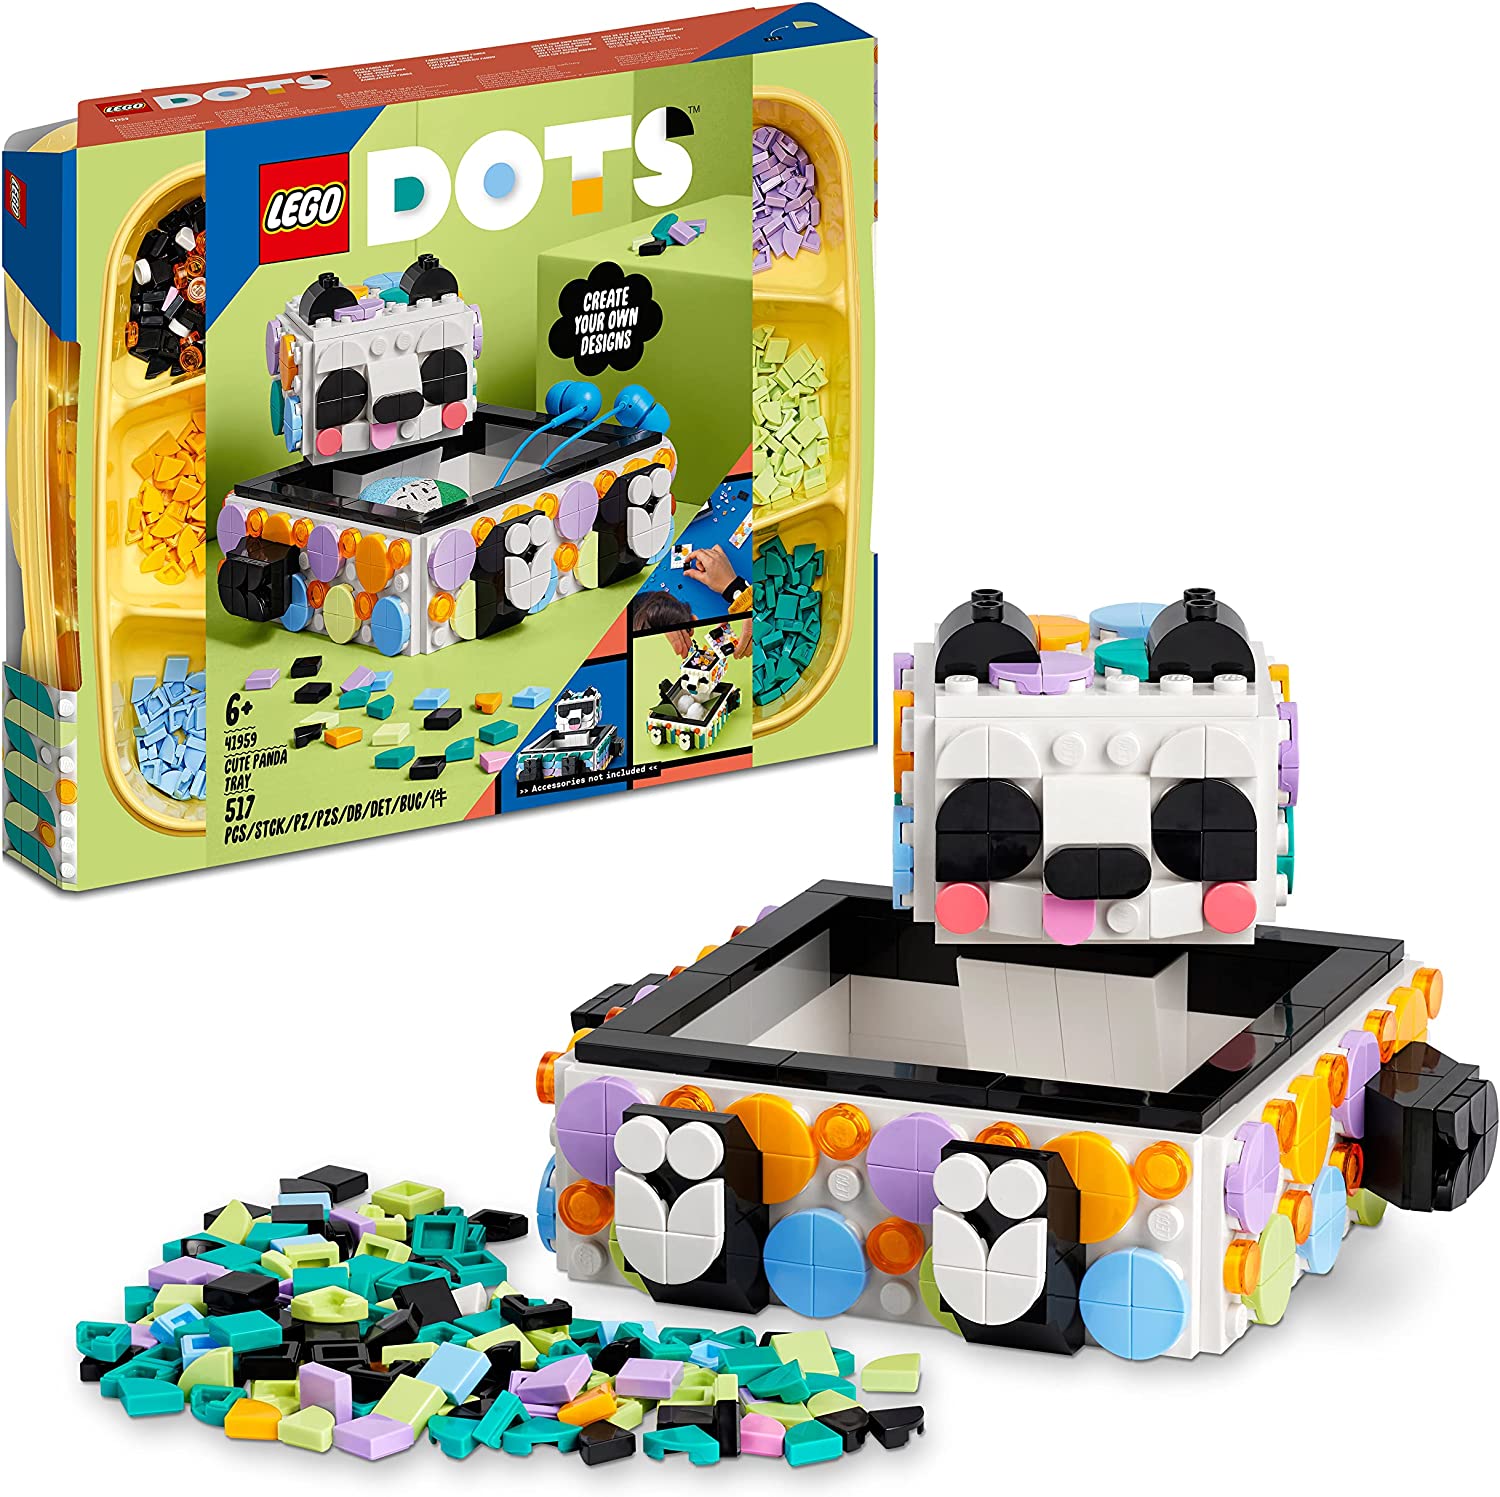 LEGO 41959 DOTS Panda Storage Tray, Craft Set for Jewellery Boxes, Toys as Desk Organiser or Children\'s Room Decoration for Children from 6 Years